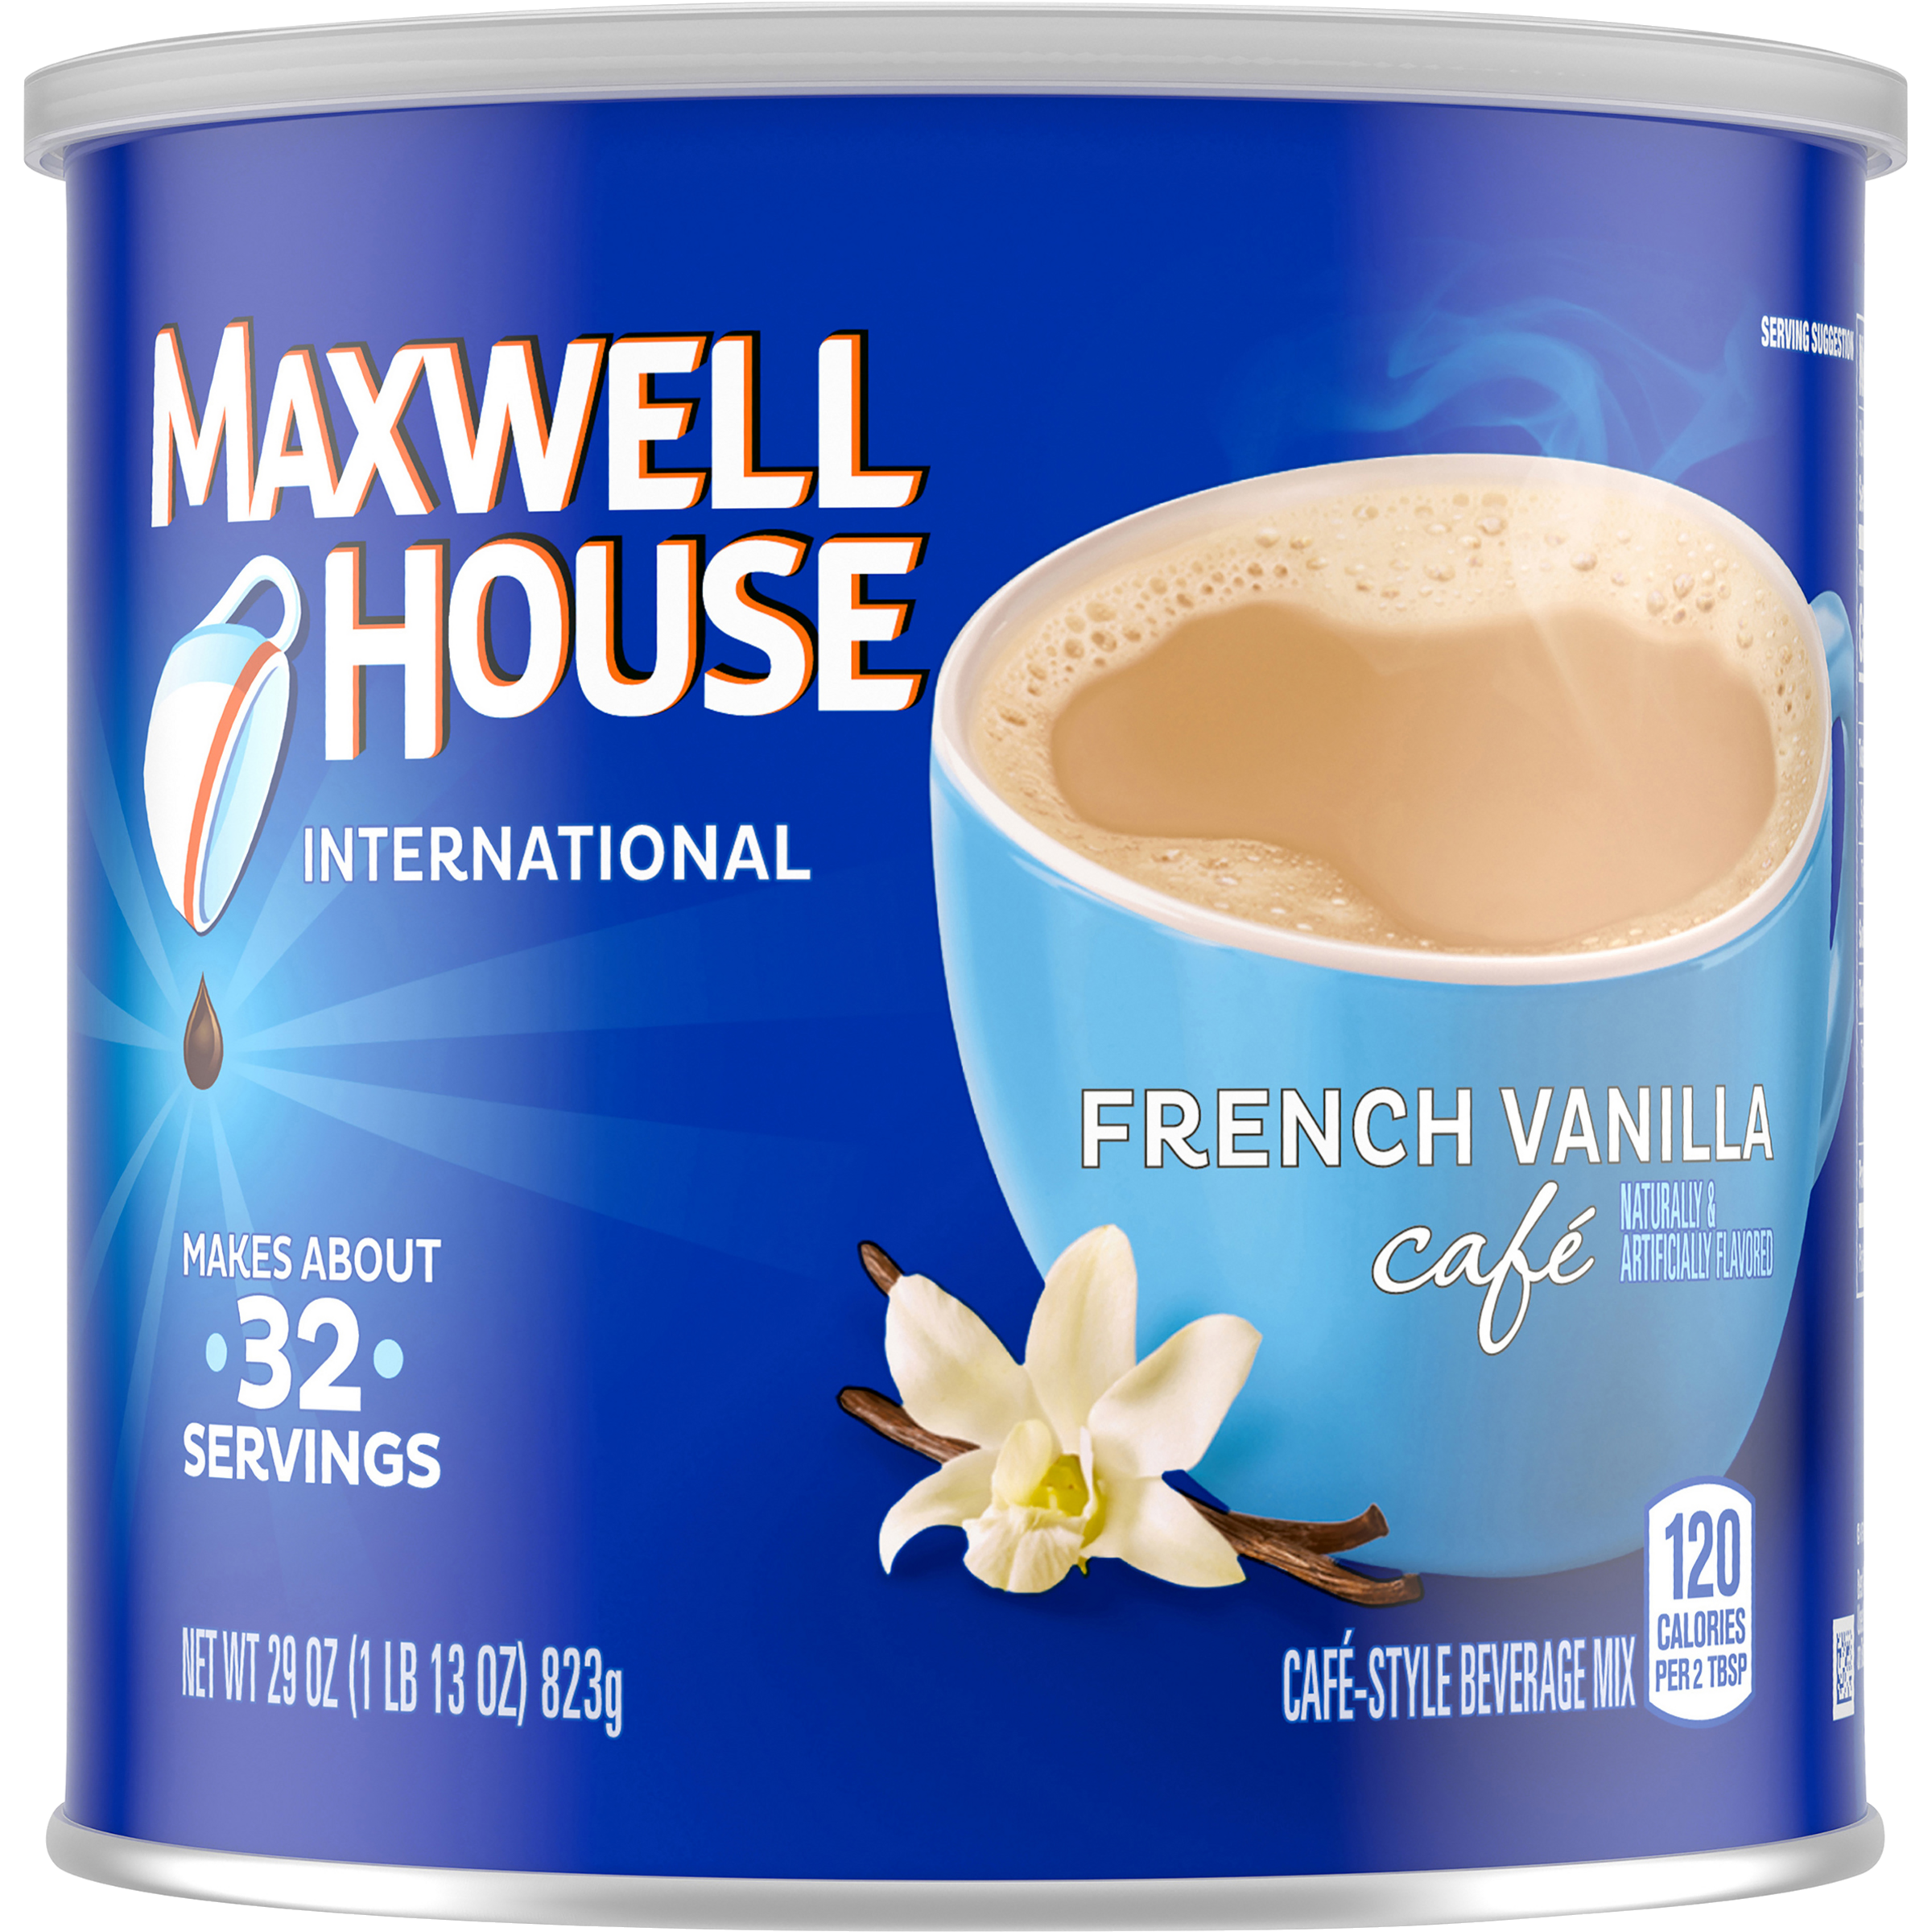 https://eatingexpired.com/is-maxwell-house-international-coffee-being-discontinued-3/